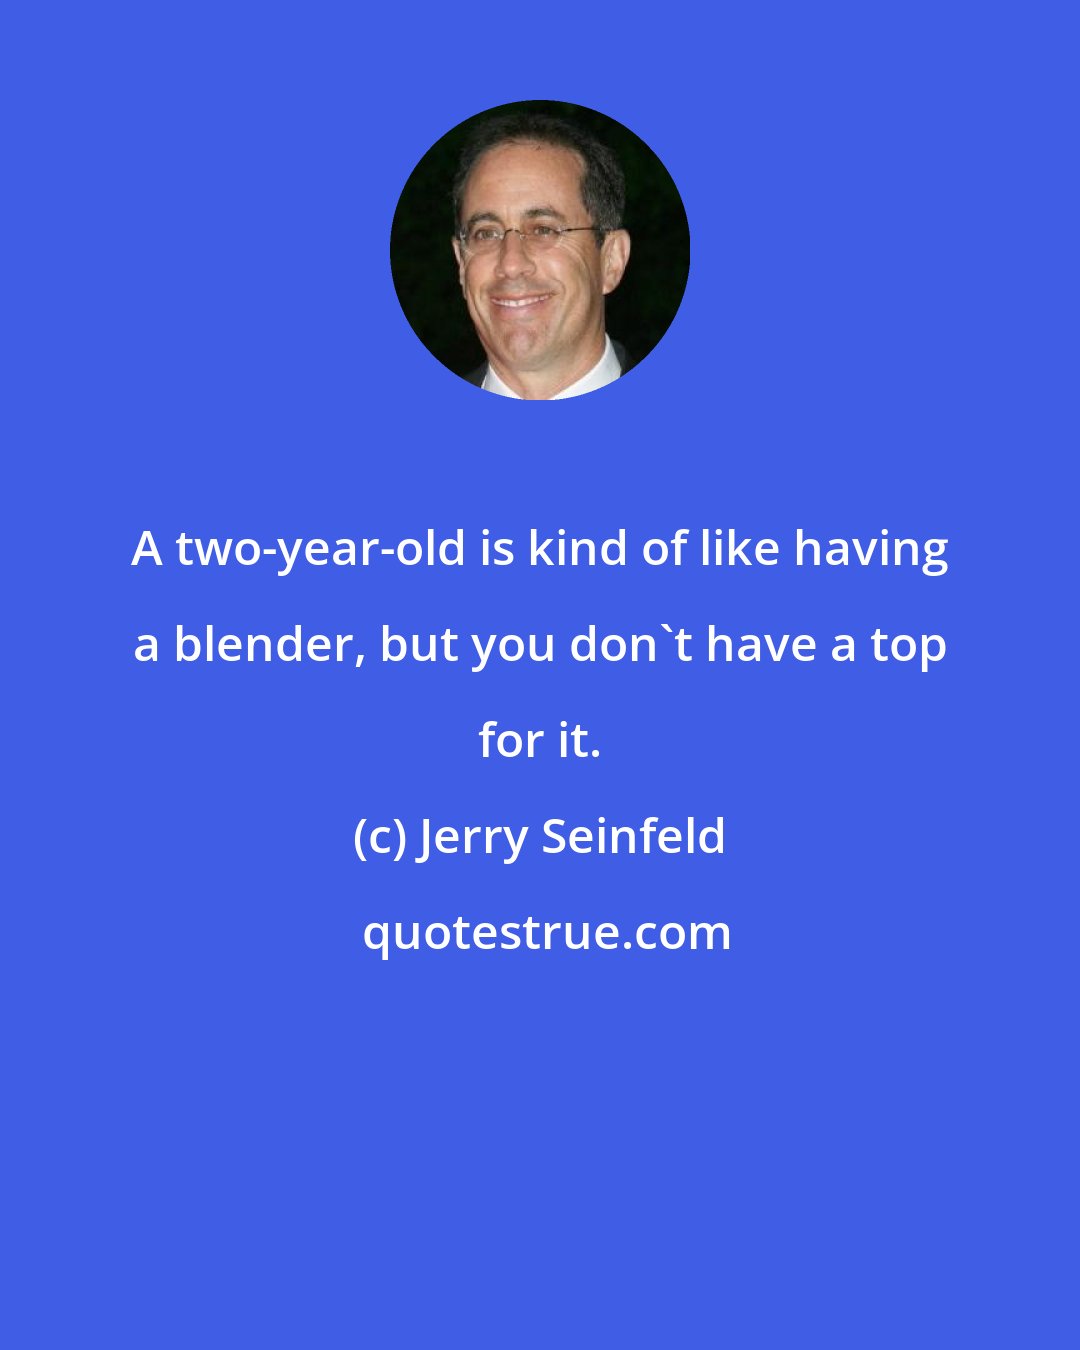 Jerry Seinfeld: A two-year-old is kind of like having a blender, but you don't have a top for it.